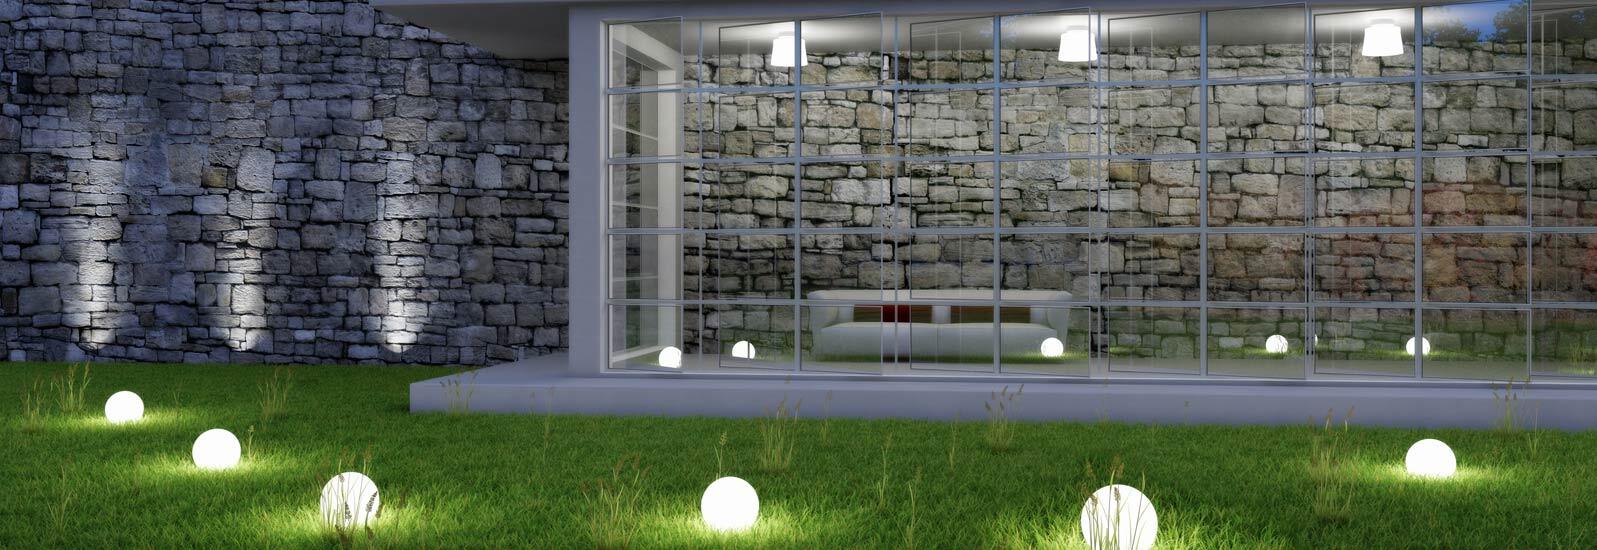 Choosing the Right Type of Outdoor Lighting: Decorative, Wall, Security, Landscape, and Portable